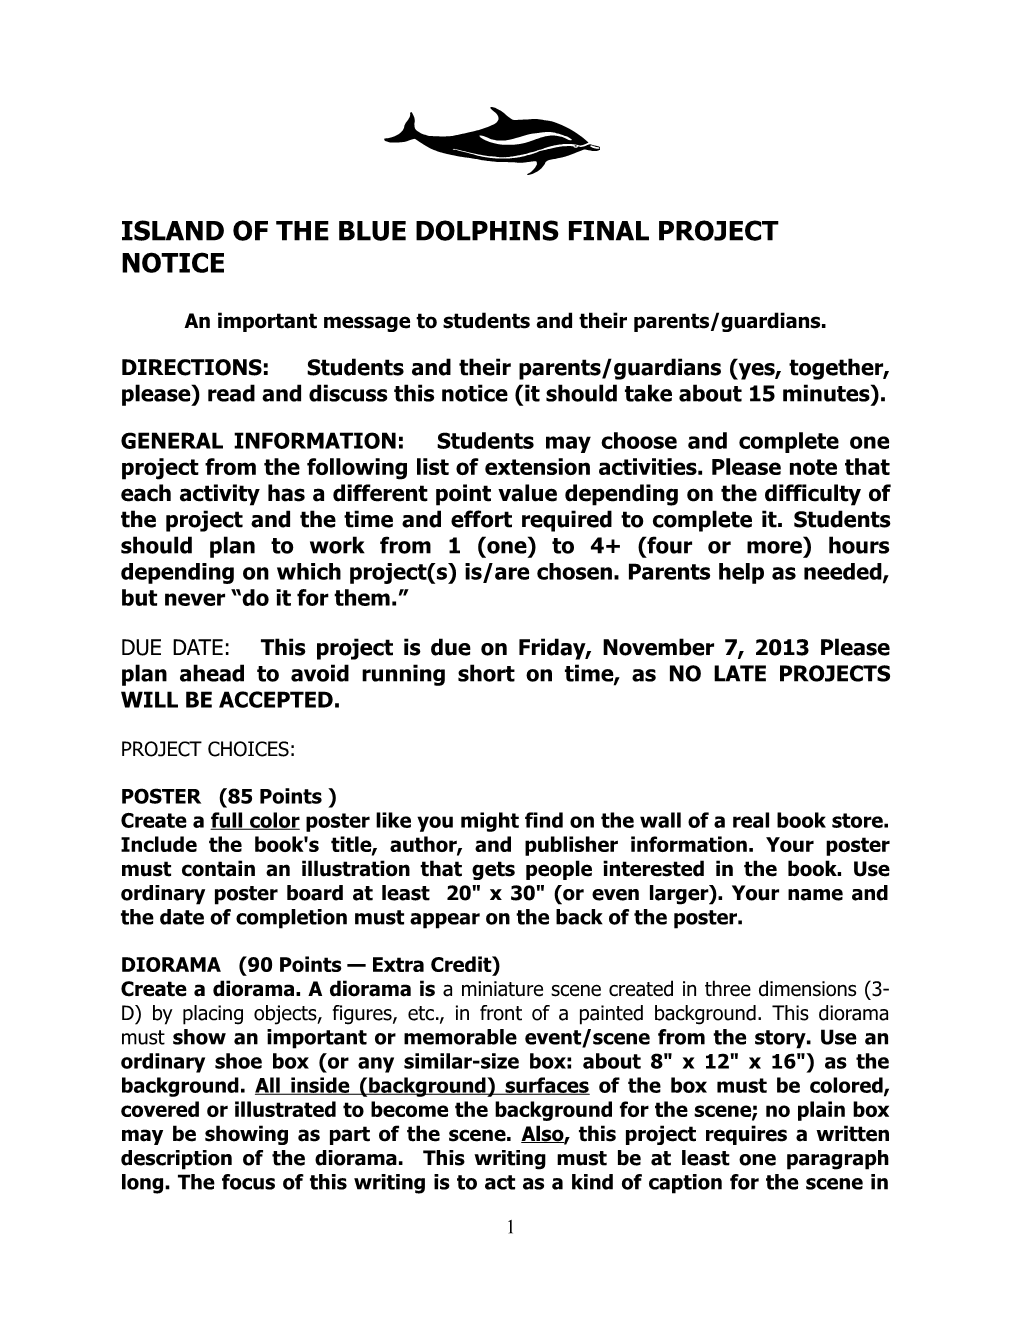 ISLAND of the BLUE DOLPHINS ONGOING ASSESSMENT (8 of 8)